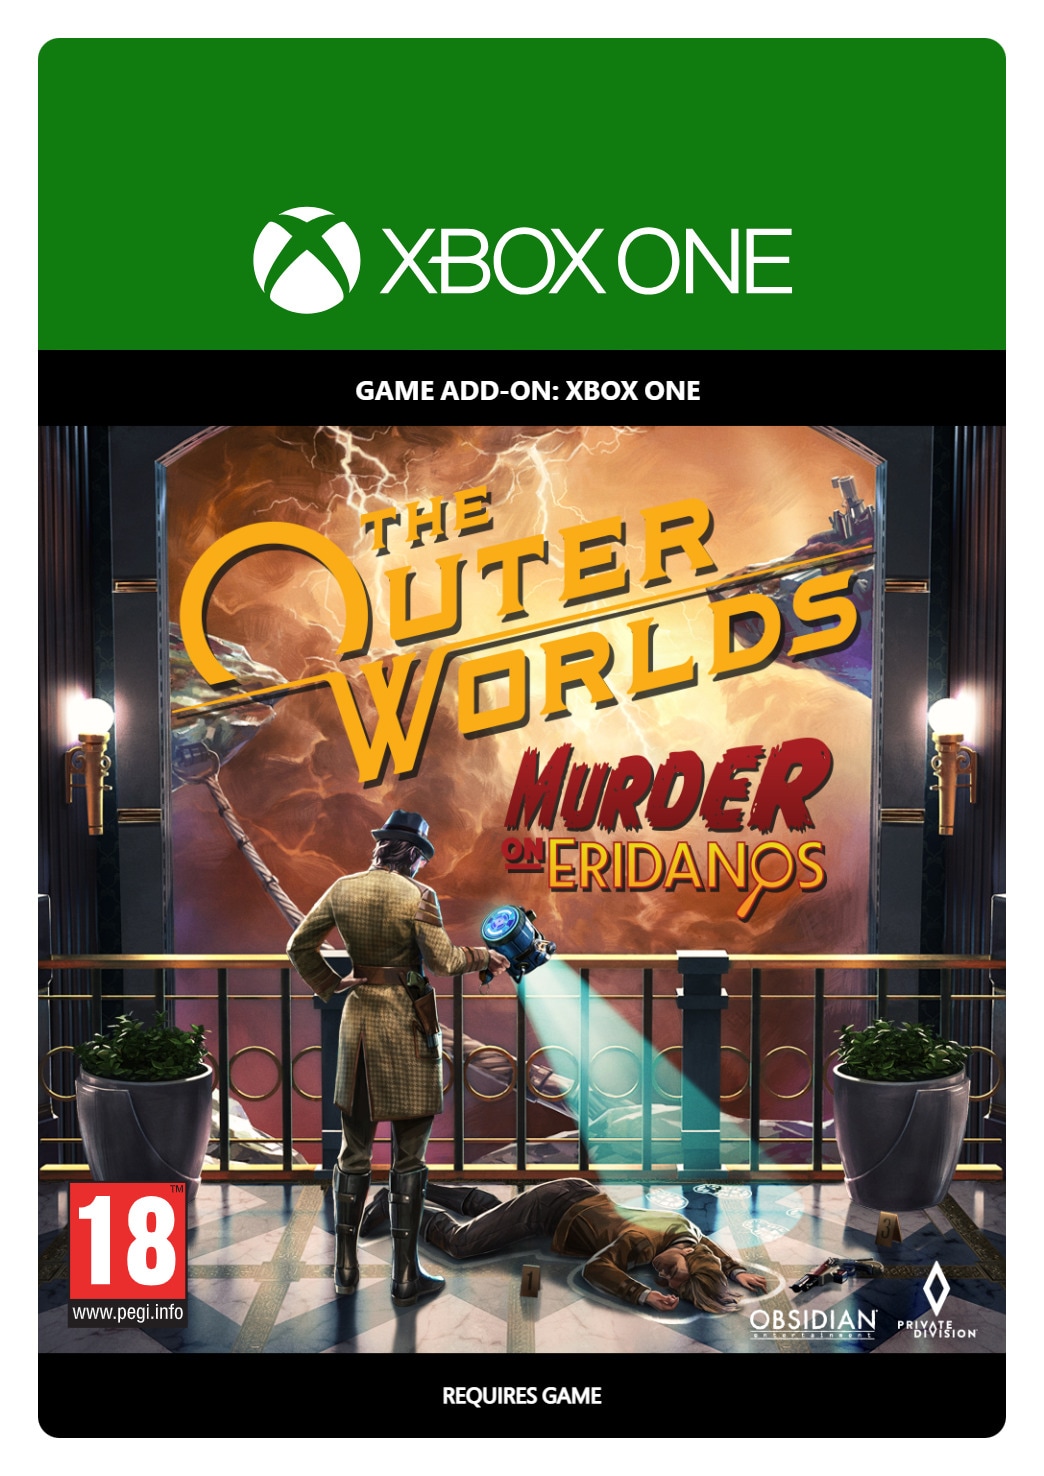 The Outer Worlds: Murder on Eridanos - XBOX One